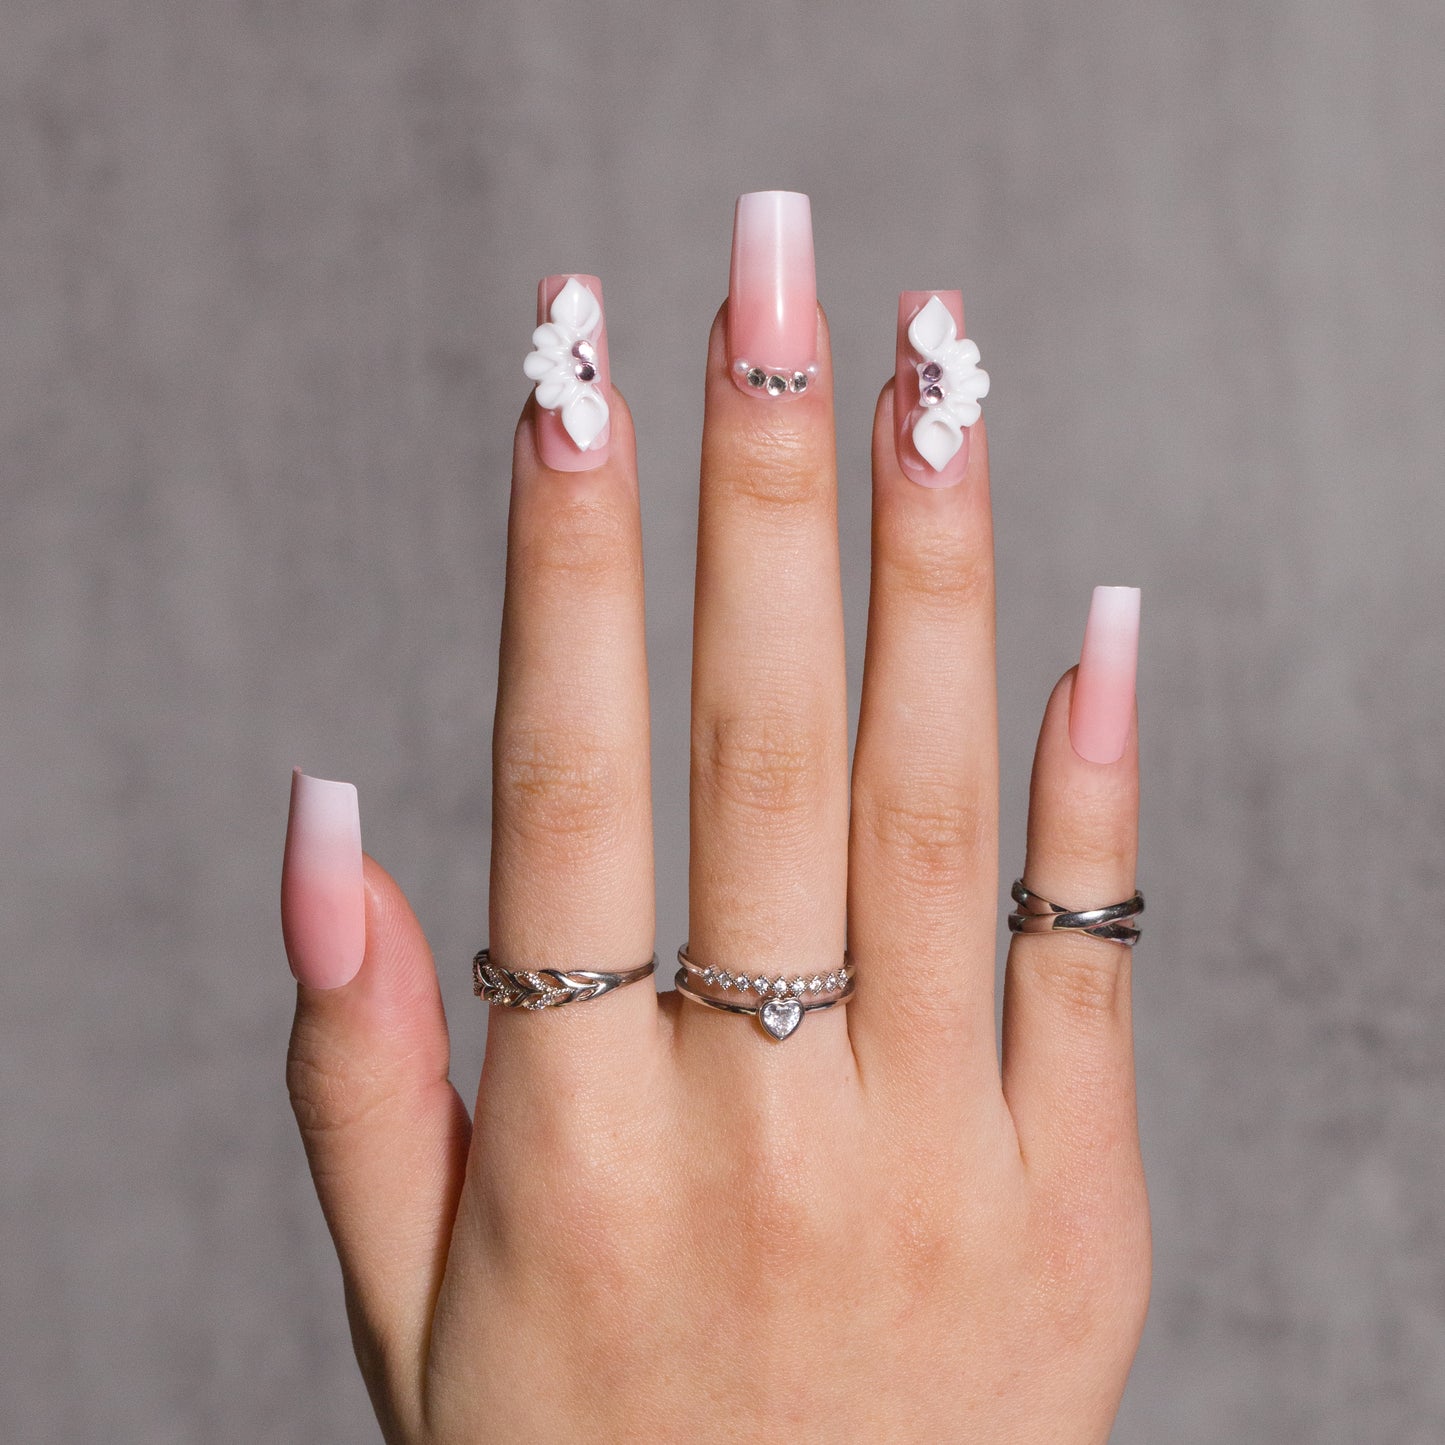 Square Press on Nails Pink White Floral Design